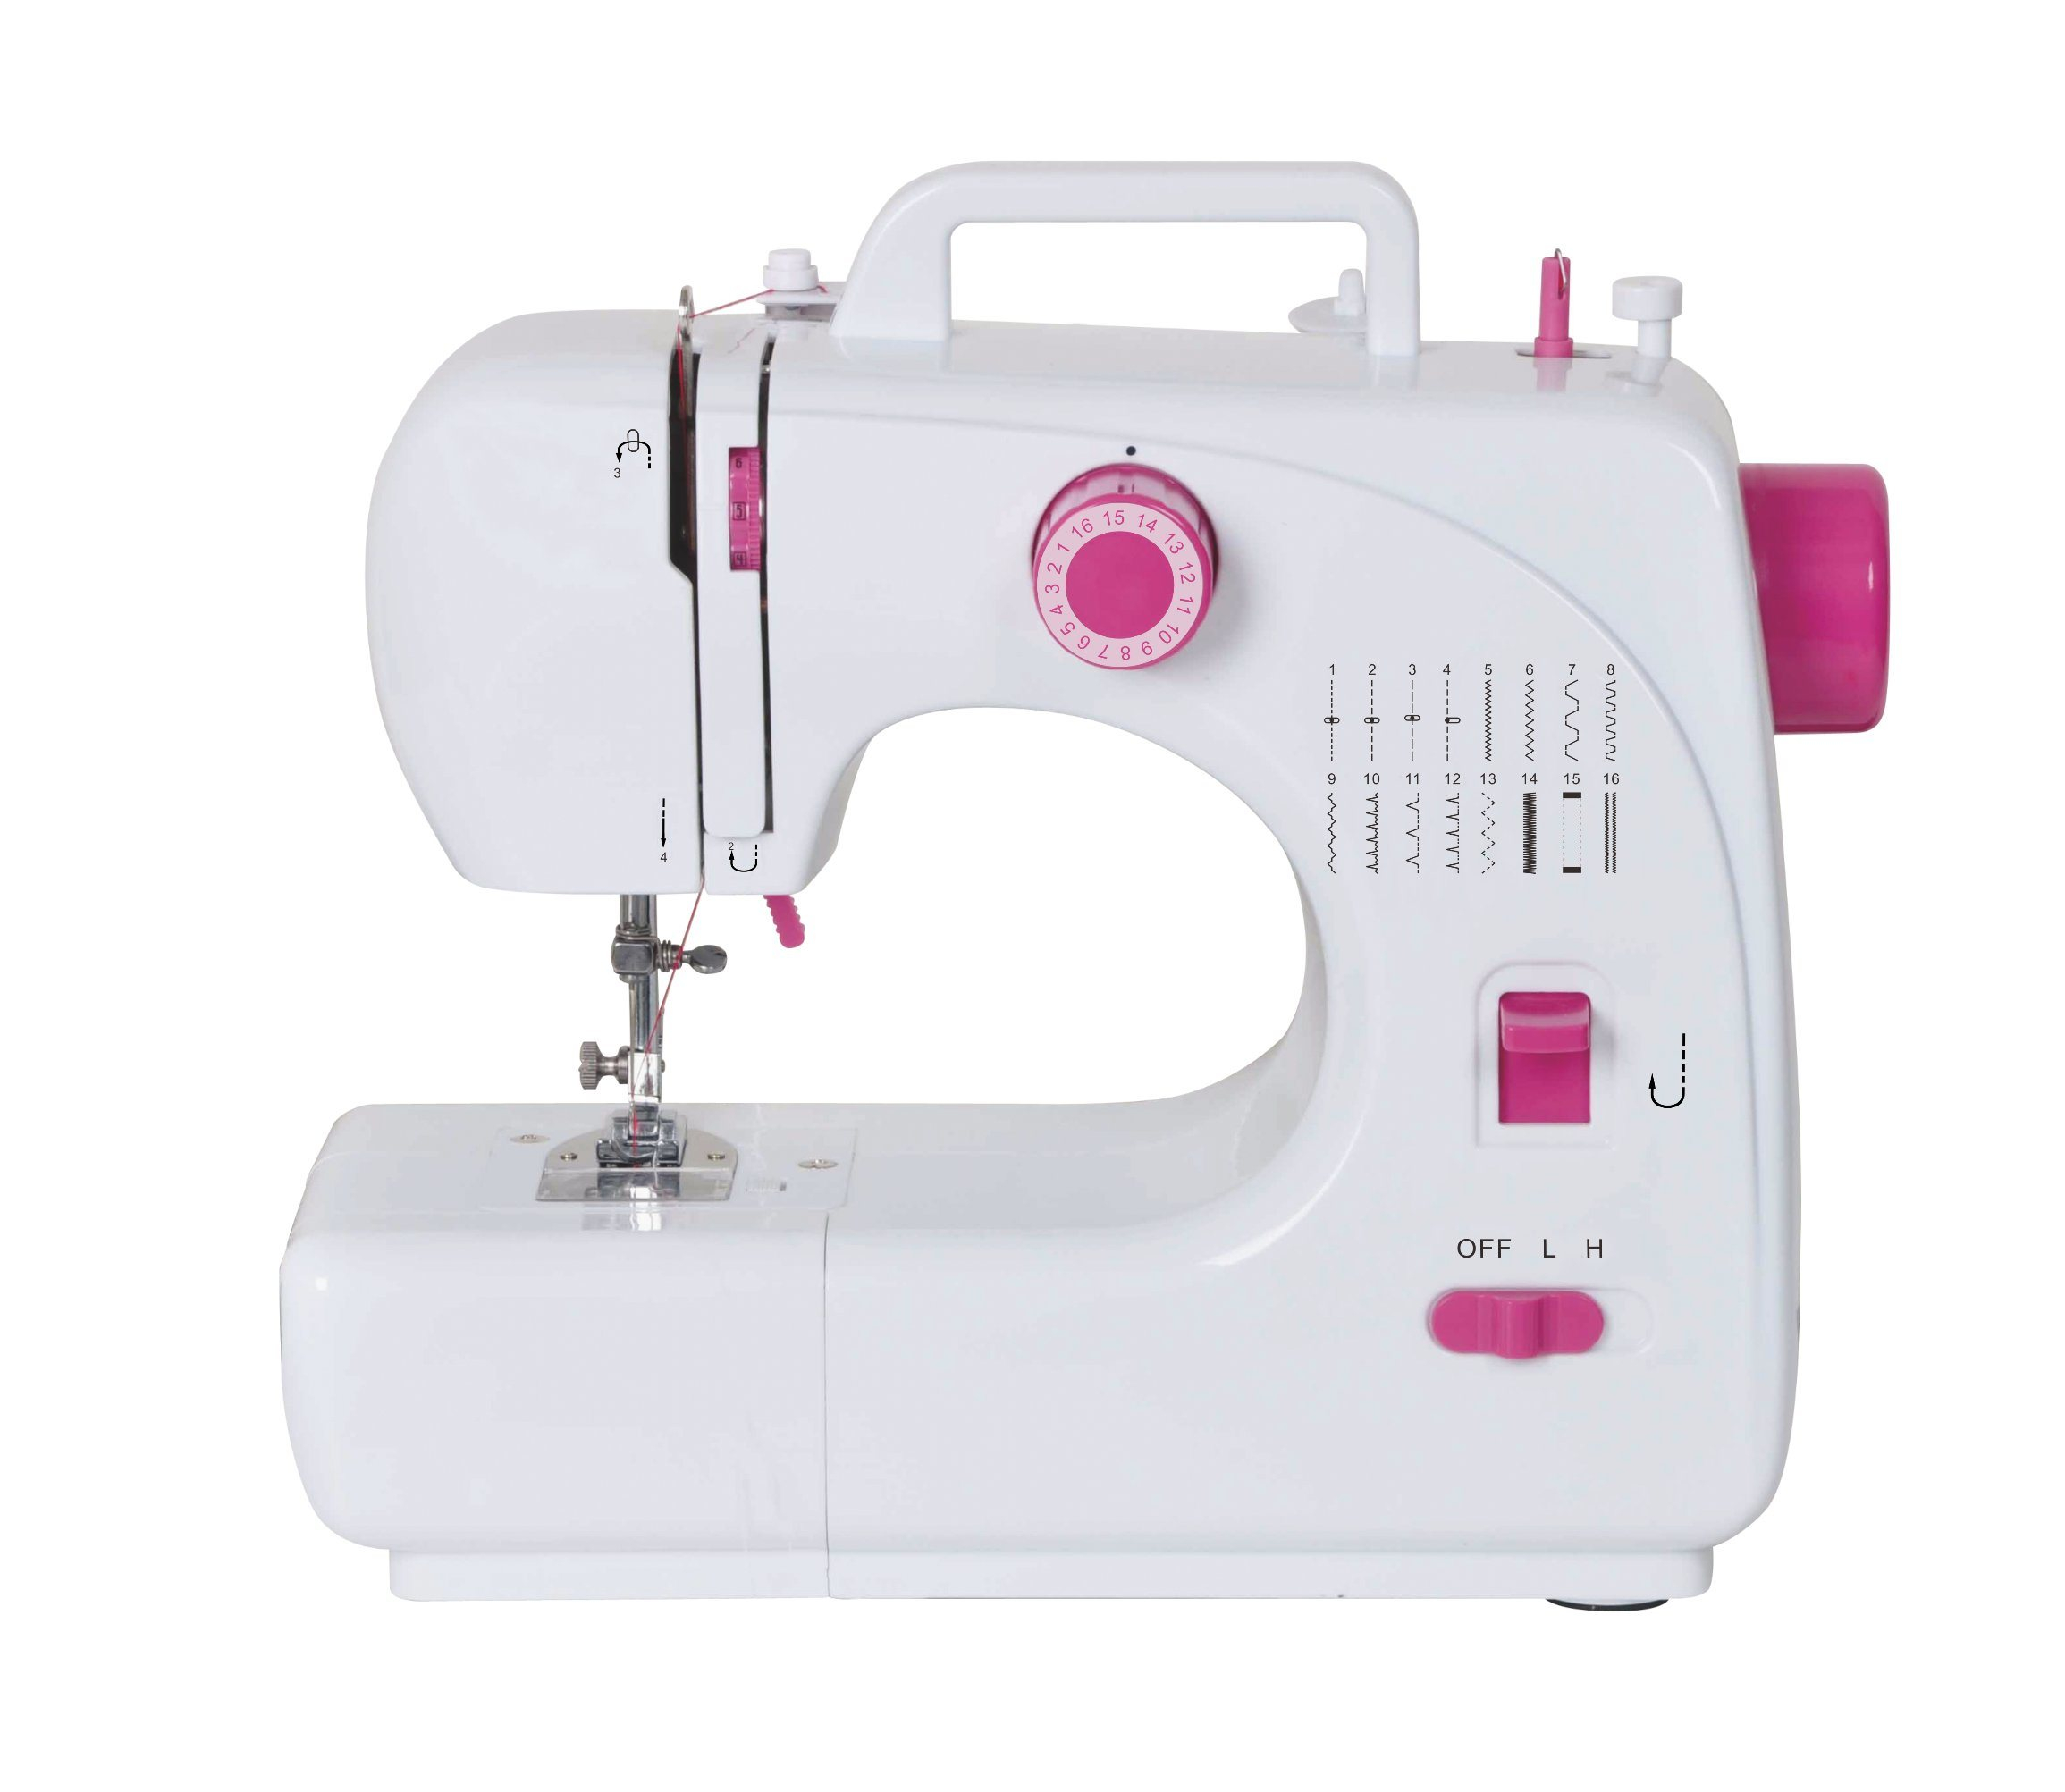 Embroidery Machine Patterns Hot Item Domestic Embroidery Sewing Machine With 16 Stitch Patterns Fhsm 508